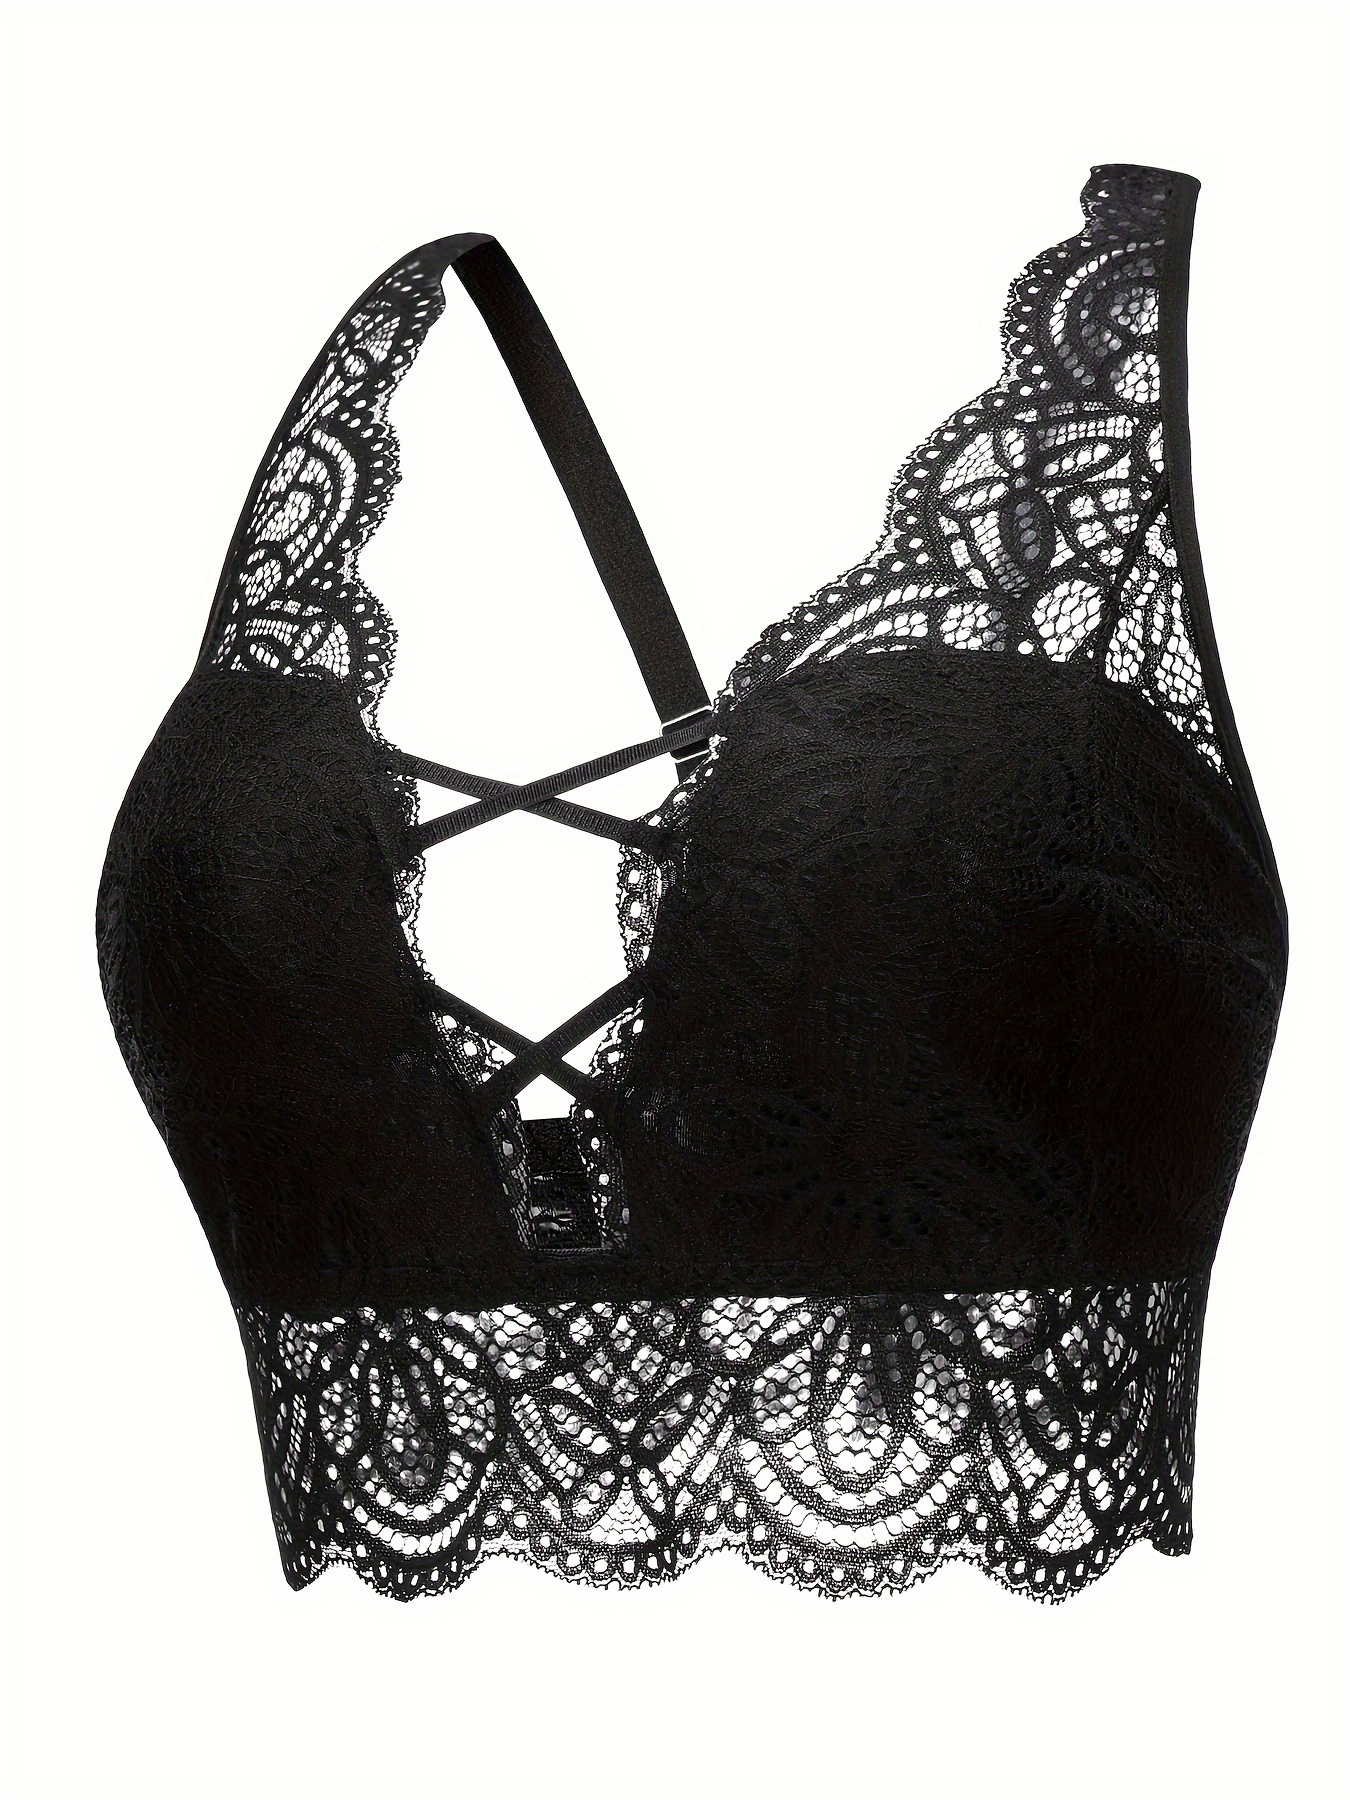 Meichang Women's Lace Bras Plus Size Lift T-shirt Bras Seamless Full  Coverage Bralettes Elegant Everyday Front Closure Full Figure Bras Nuring  Bra 